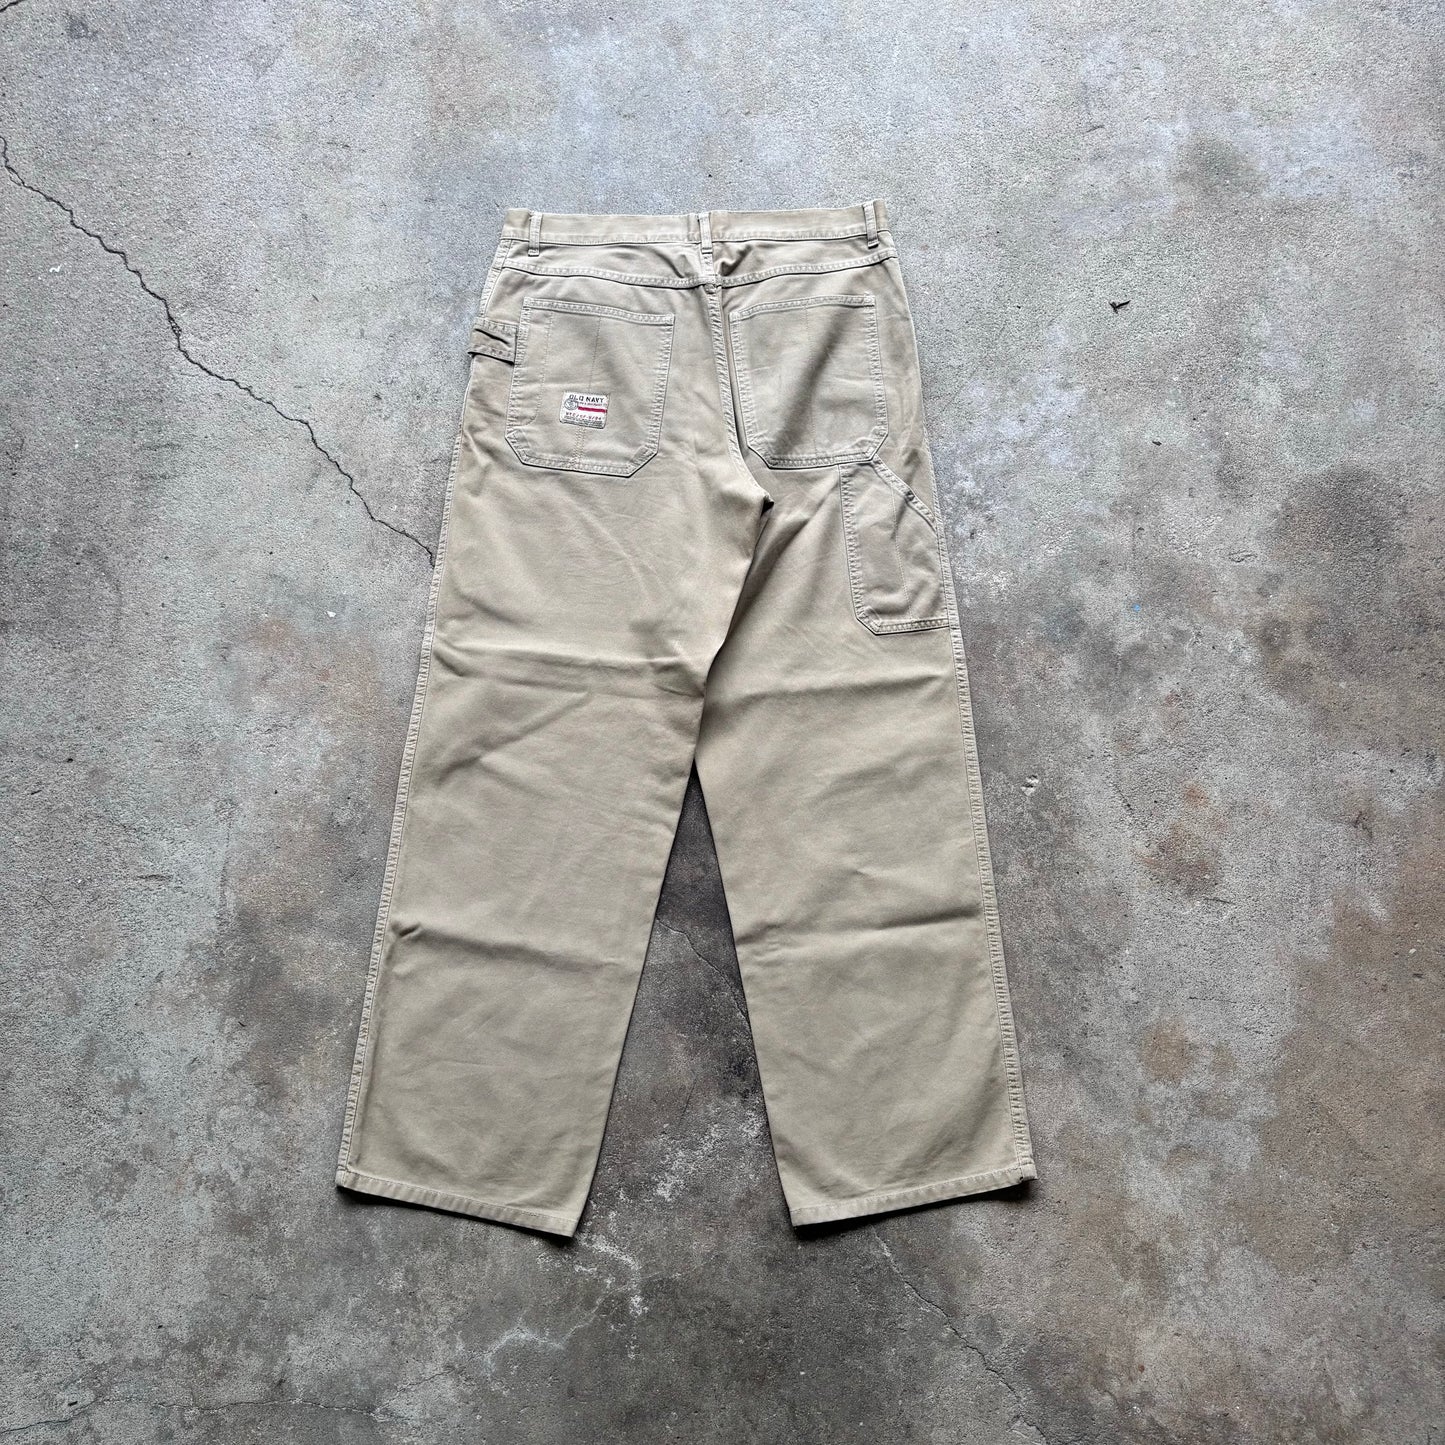 Vintage Old Navy 'Supplied and Equipment' Tag Smooth Carpenter Pants [33 x 32]